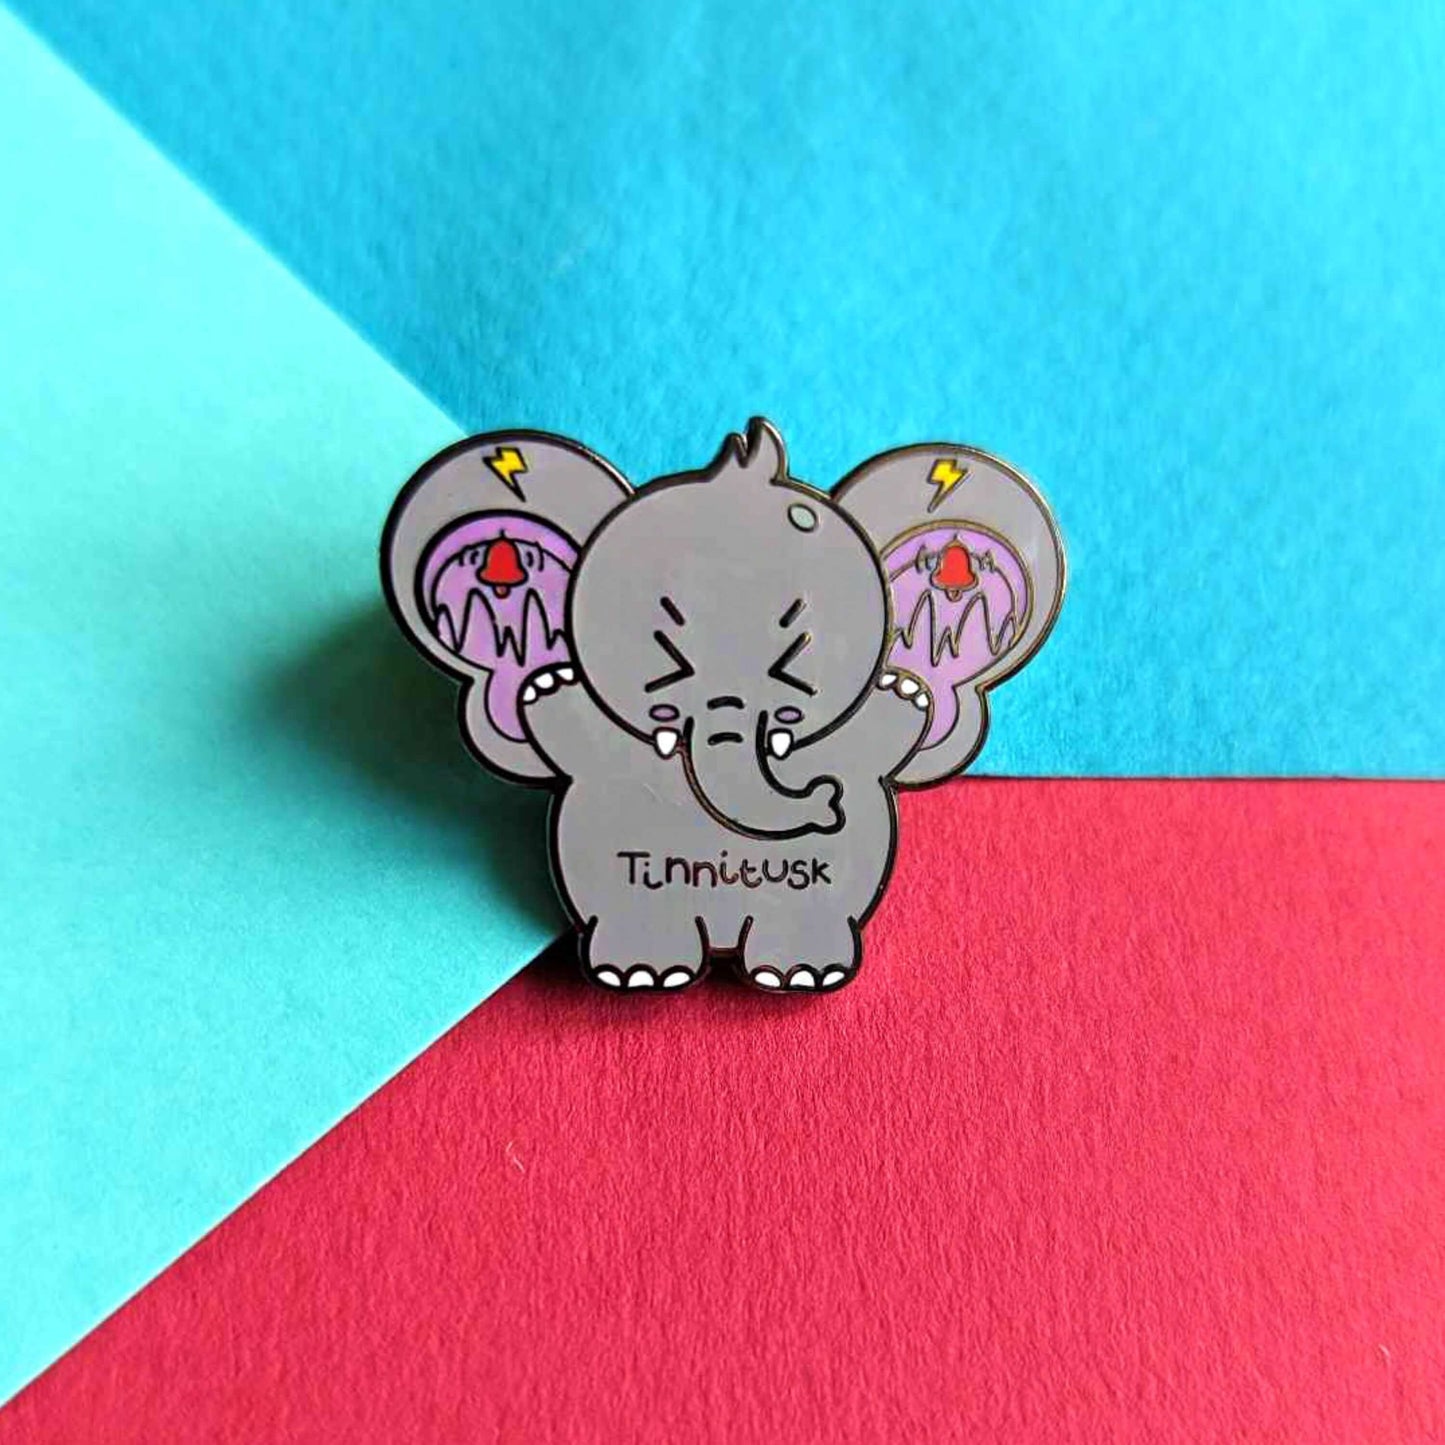 Tinnitus Enamel Pin on a blue and red background. A grey elephant shaped enamel pin with big ears with purple on the inside of them and black squiggly lines with red ringing alarm bells above the lines and yellow lightening bolts above the bells. The elephant has its eyes screwed shut and its arms up. 'Tinnitusk' is written in black across its middle.